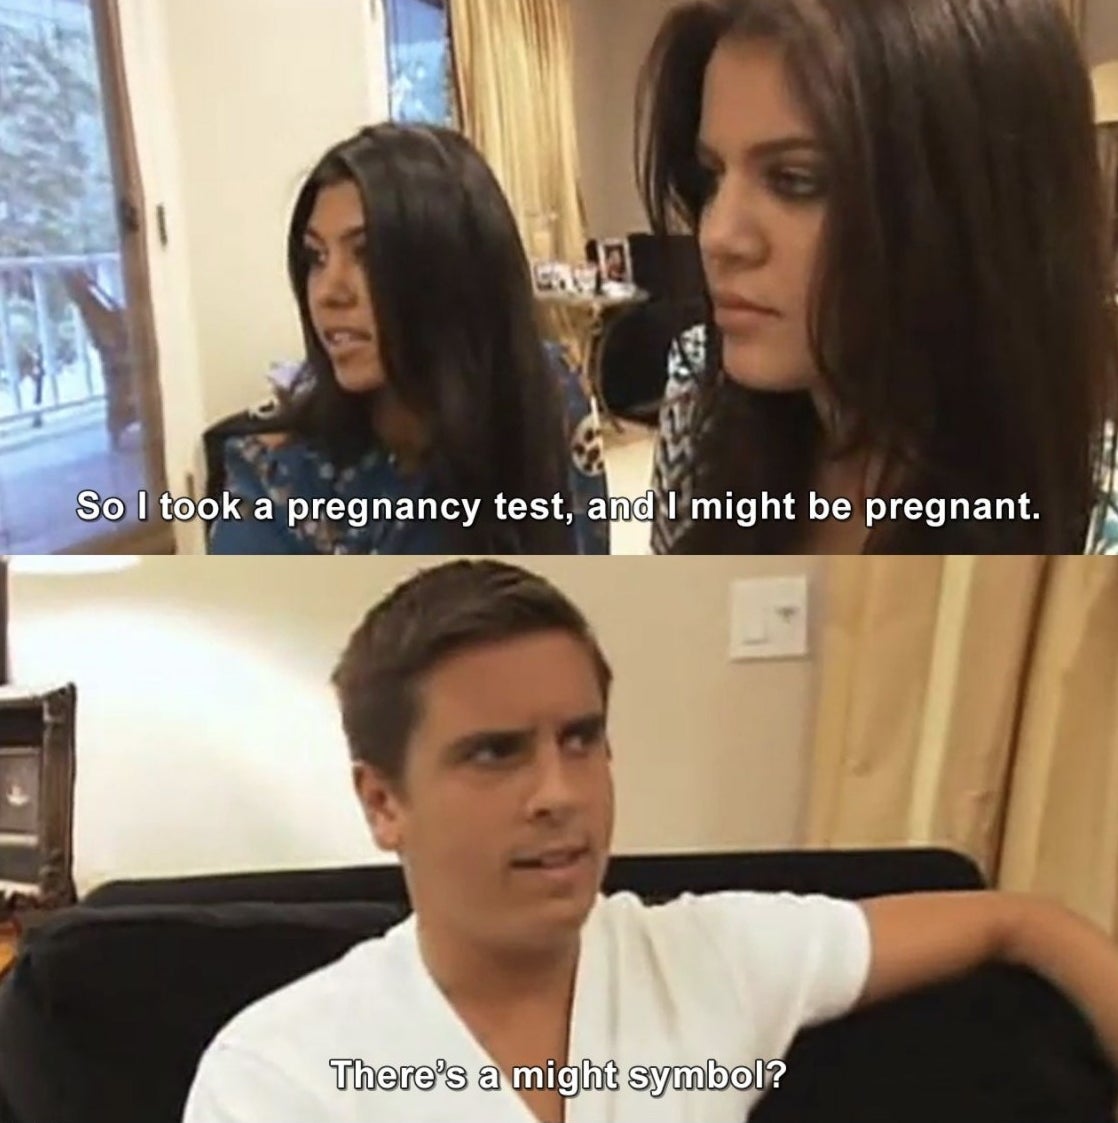 Kourtney tells Scott, &quot;So I took a pregnancy test and I might be pregnant&quot; and Scott says, &quot;There&#x27;s a might symbol?&quot;